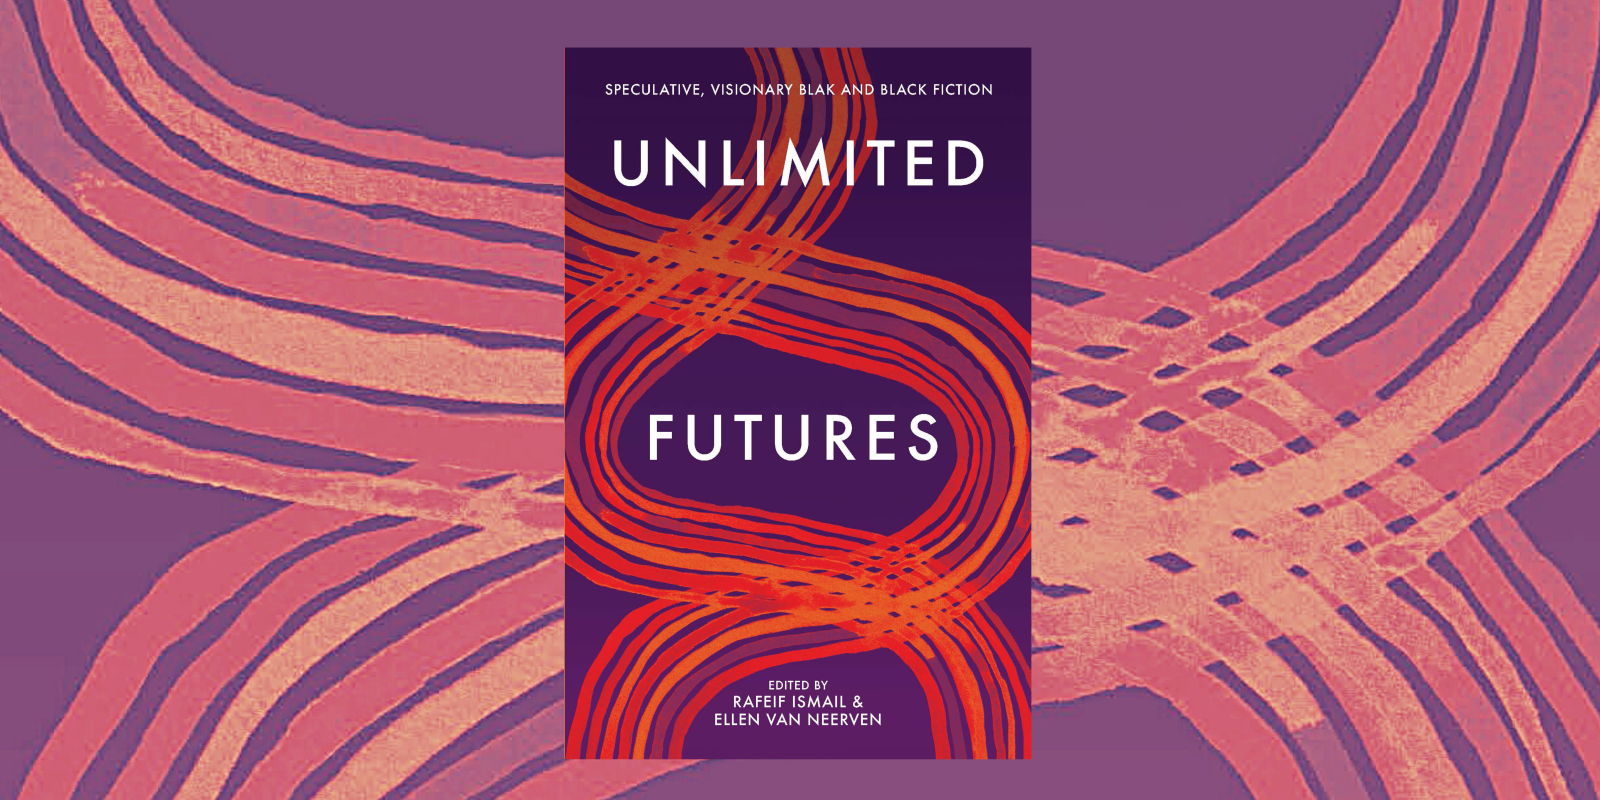 Unlimited Futures